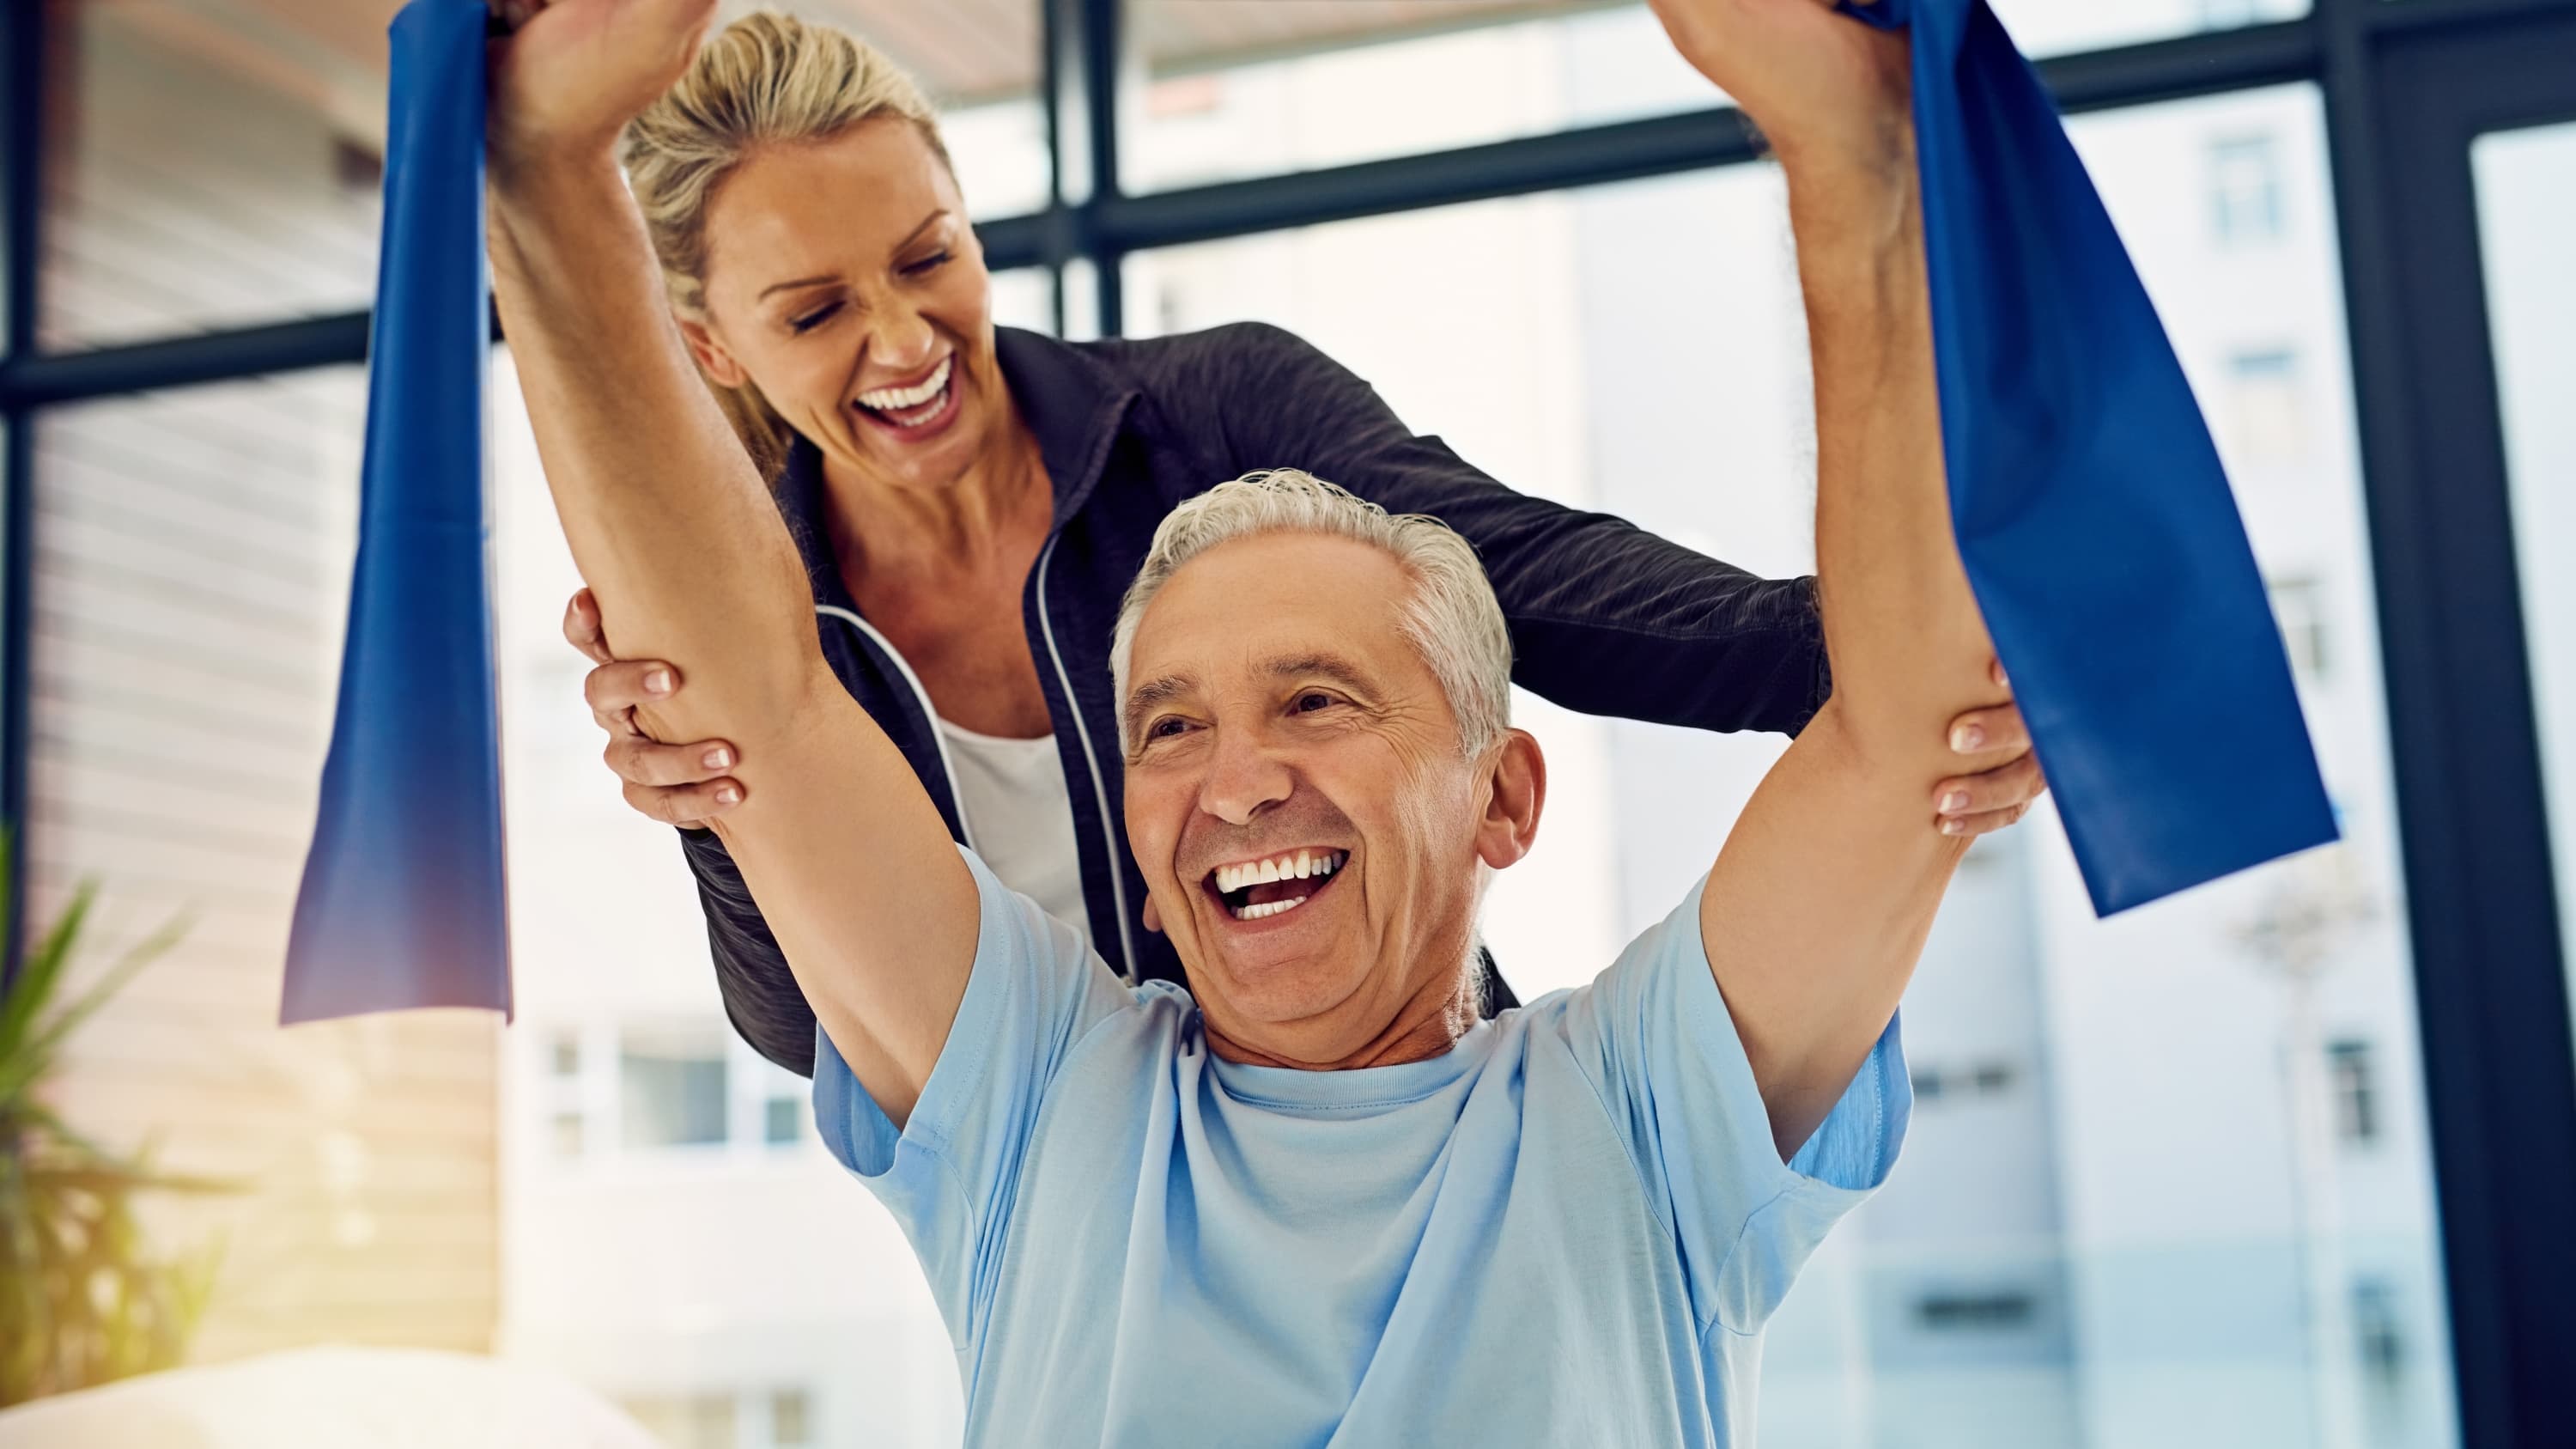 Photograph of a physical therapist helping a senior patient stretch with a stretch band in her office, possibly as part of cancer rehabilitation